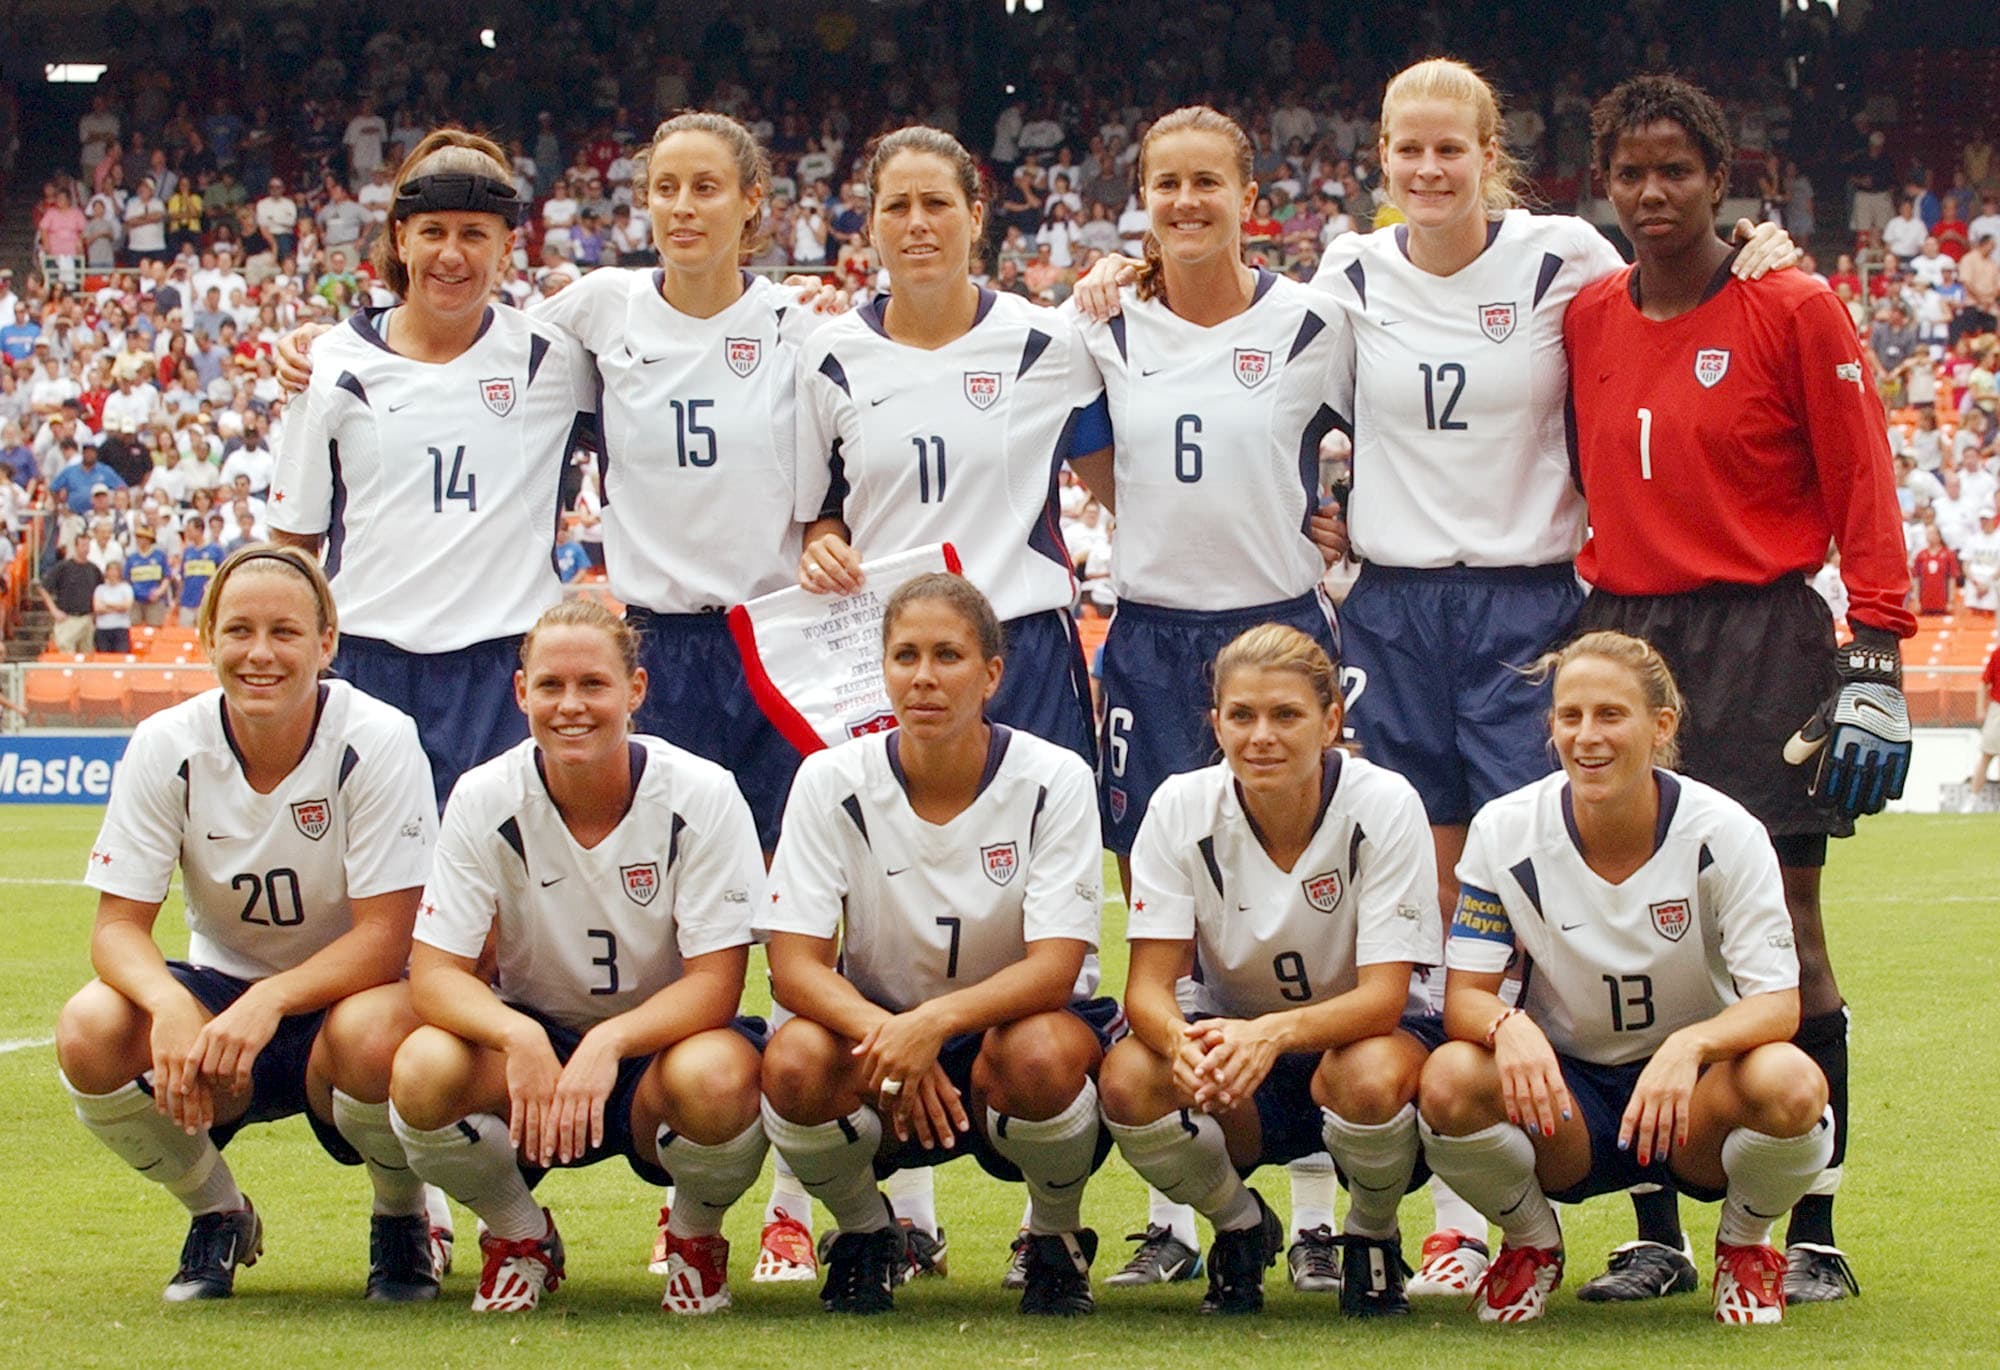 Mia Hamm On If She Would Coach The US Women's National Soccer Team